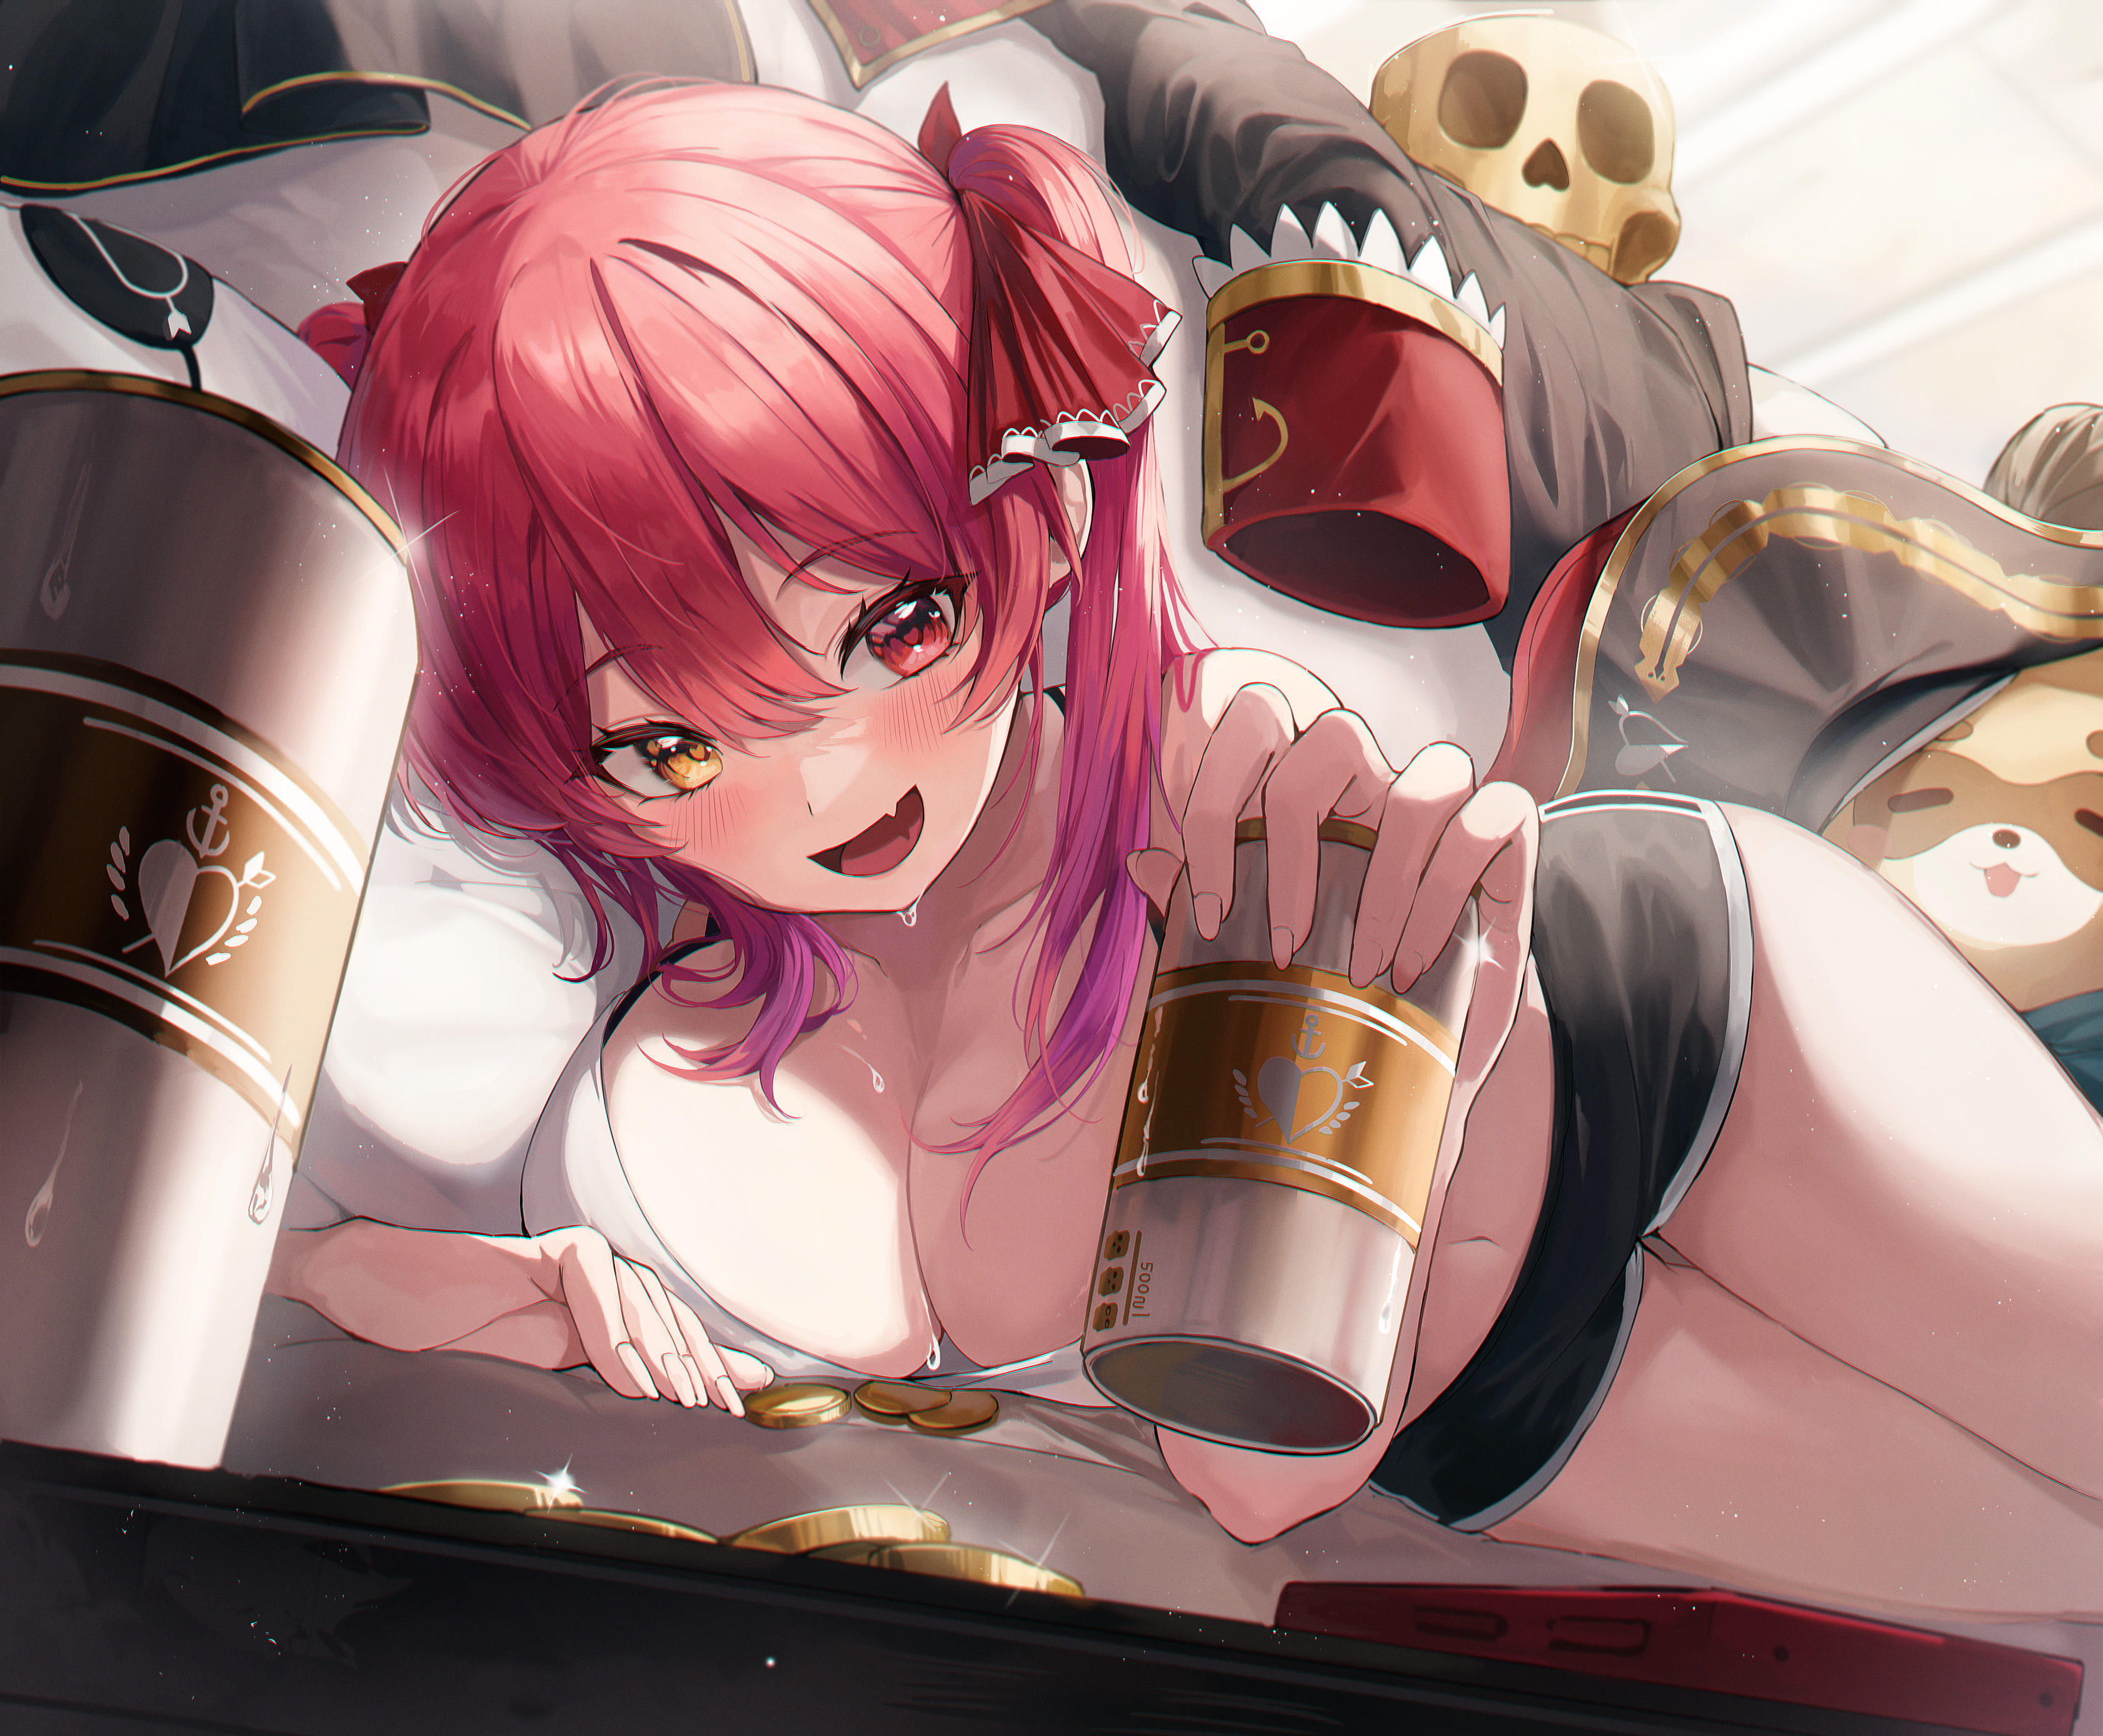 Anime 3364x2777 anime anime girls redhead heterochromia big boobs sweaty body sweat beer cleavage short shorts Houshou Marine low-angle looking below gold coins Hololive Virtual Youtuber 2GONG